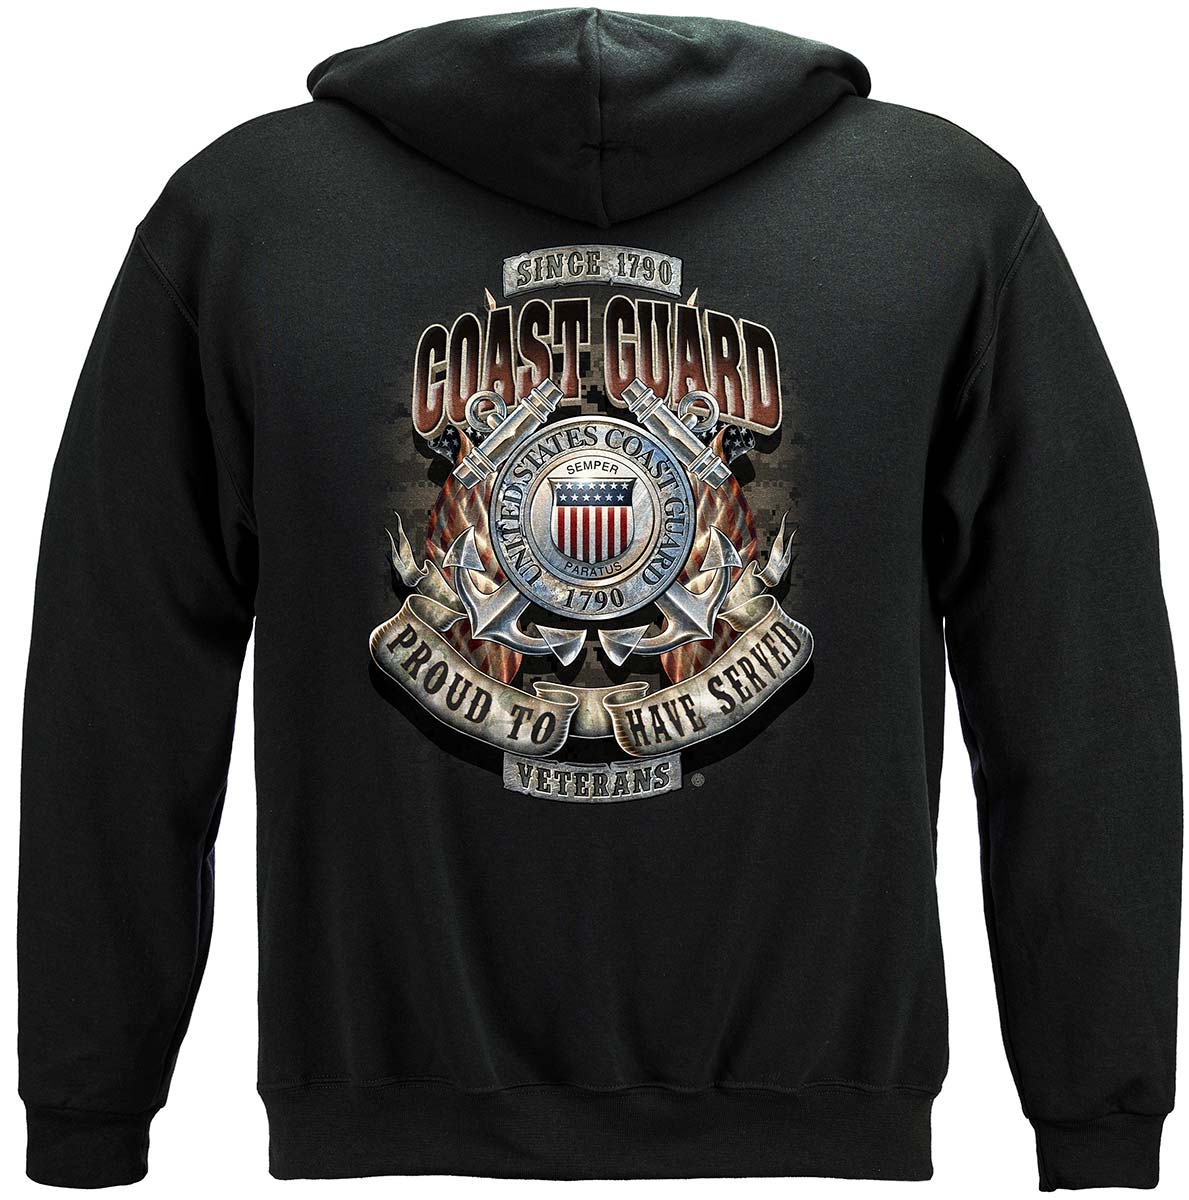 Coast Guard Proud To Have Served Premium Hooded Sweat Shirt